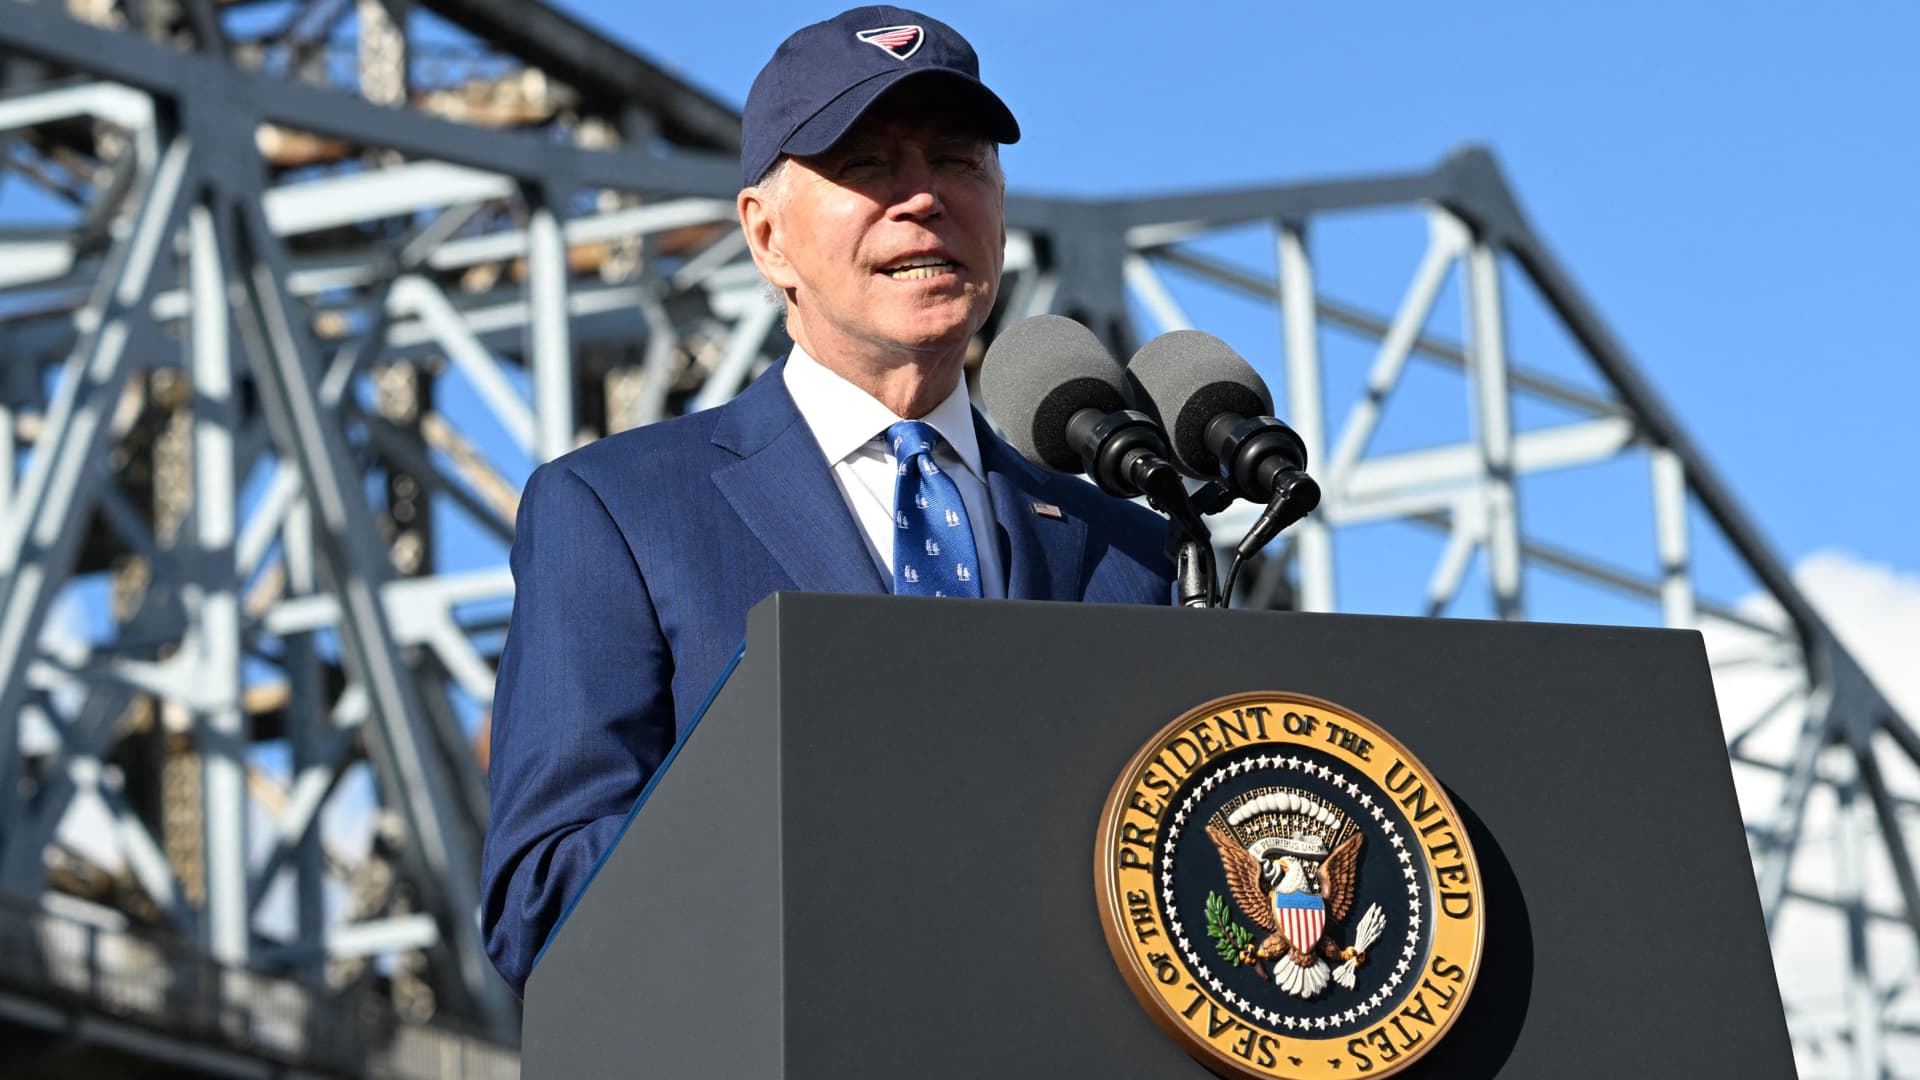 US President Joe Biden speaks about the bipartisan infrastructure law in front of the Brent Spence Bridge in Covington, Kentucky, on January 4, 2023.